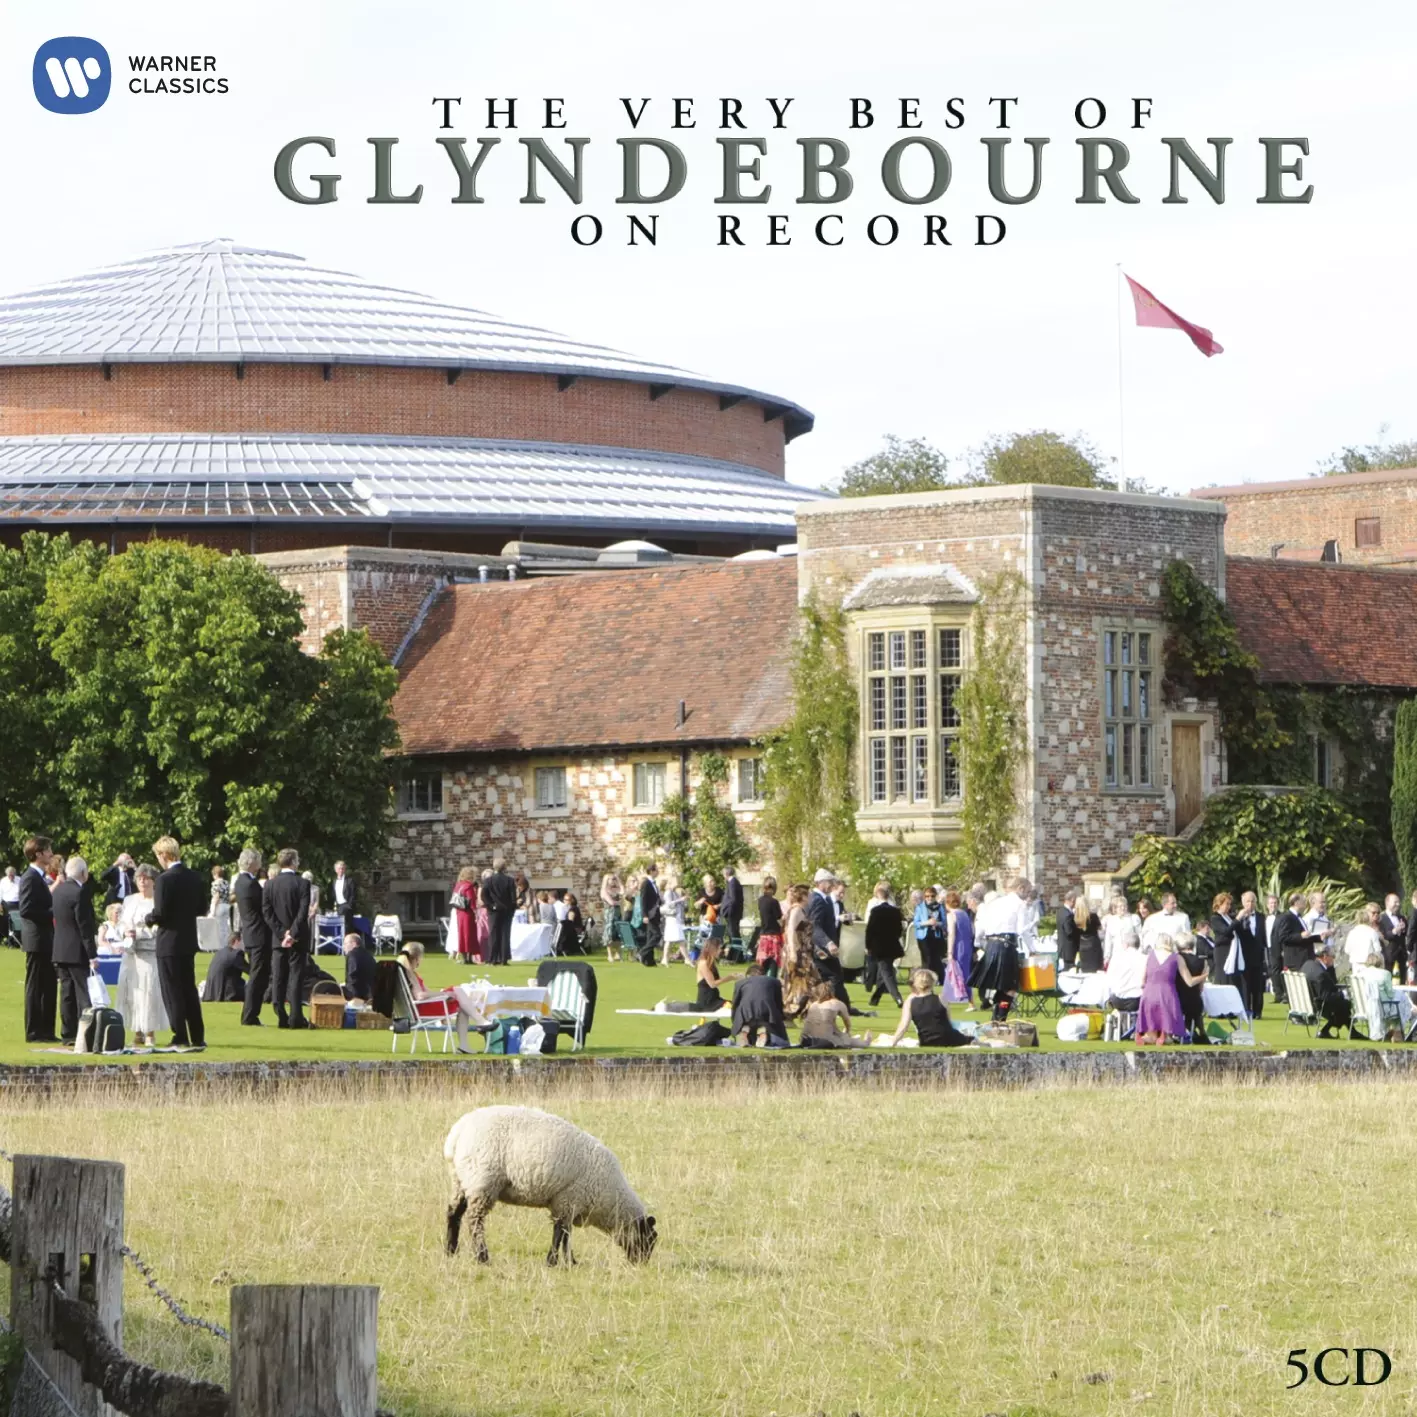 The Very Best of Glyndebourne on Record